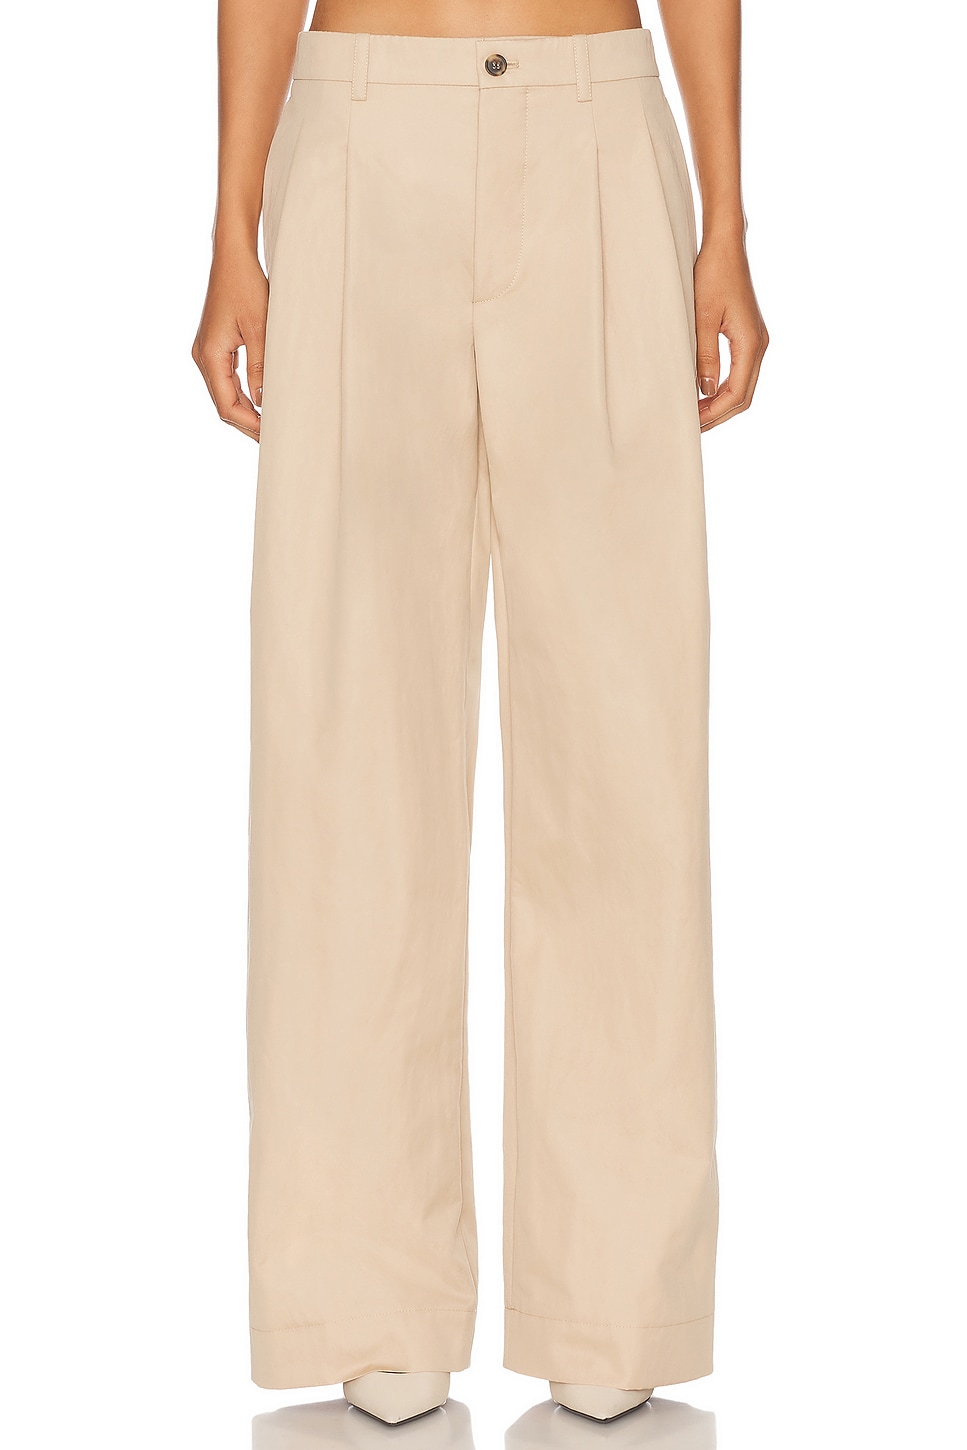 Drill Chino Pant in Beige